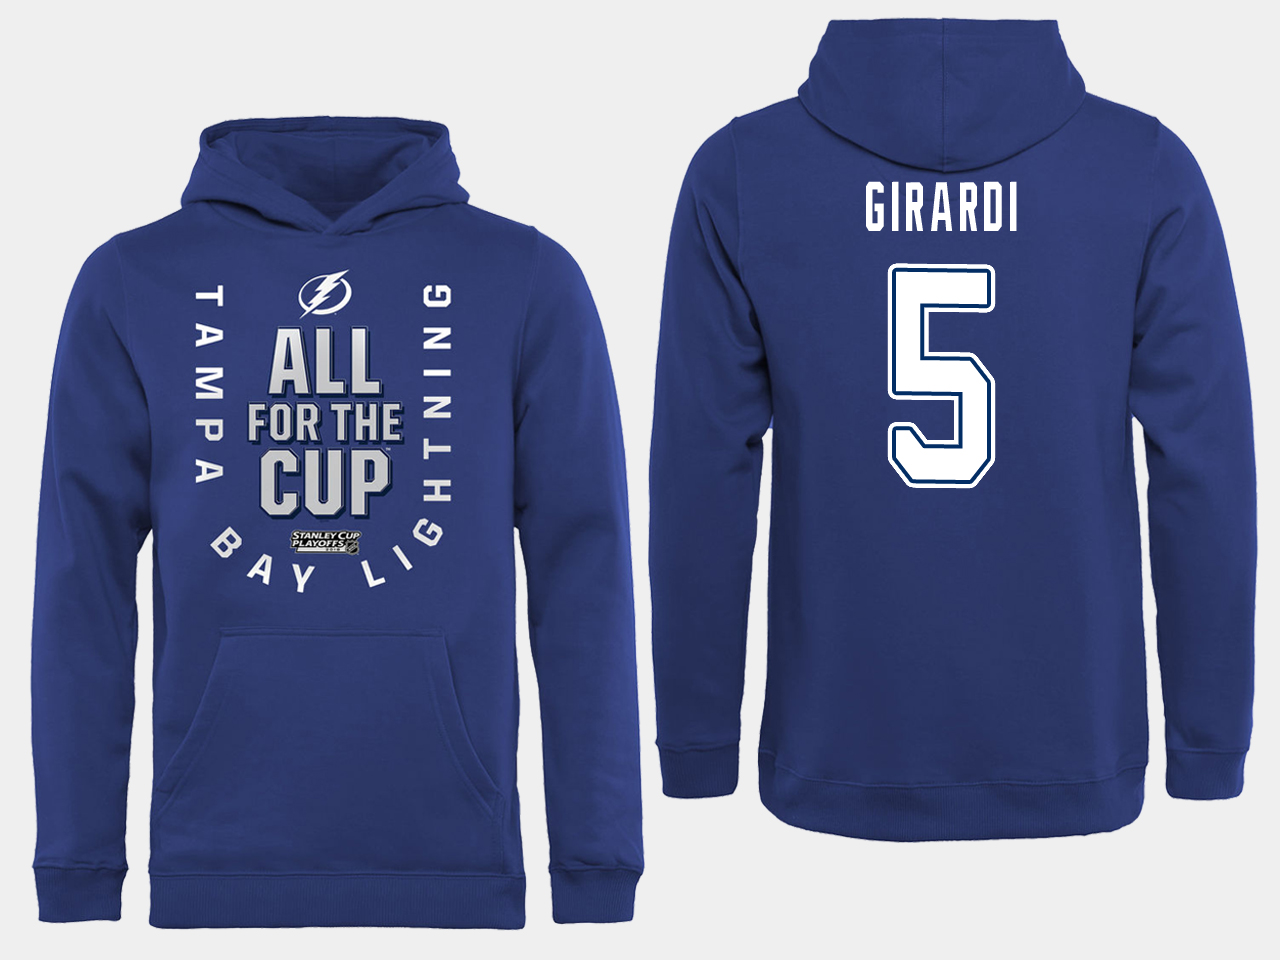 NHL Men adidas Tampa Bay Lightning #5 Girardi blue All for the Cup Hoodie